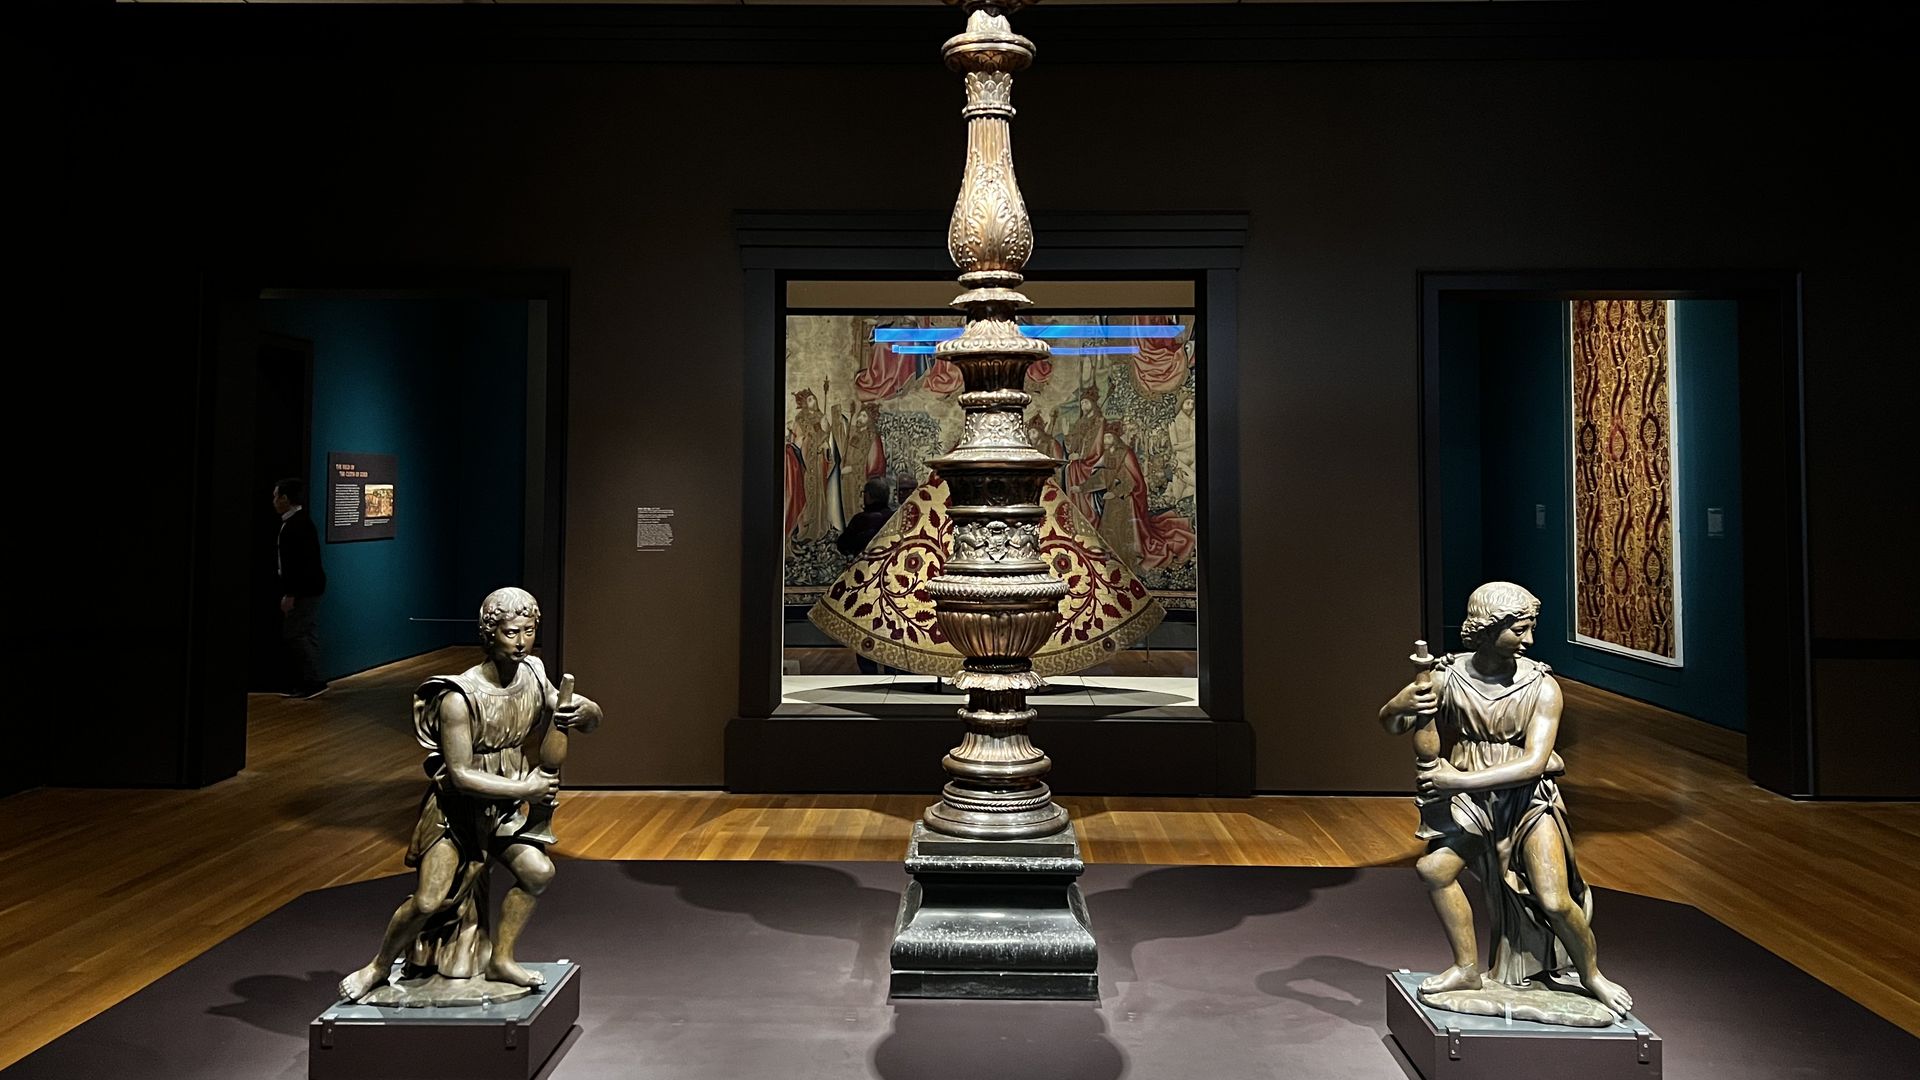 Three statues from the English Renaissance sit in front of a cope in an art exhibit.